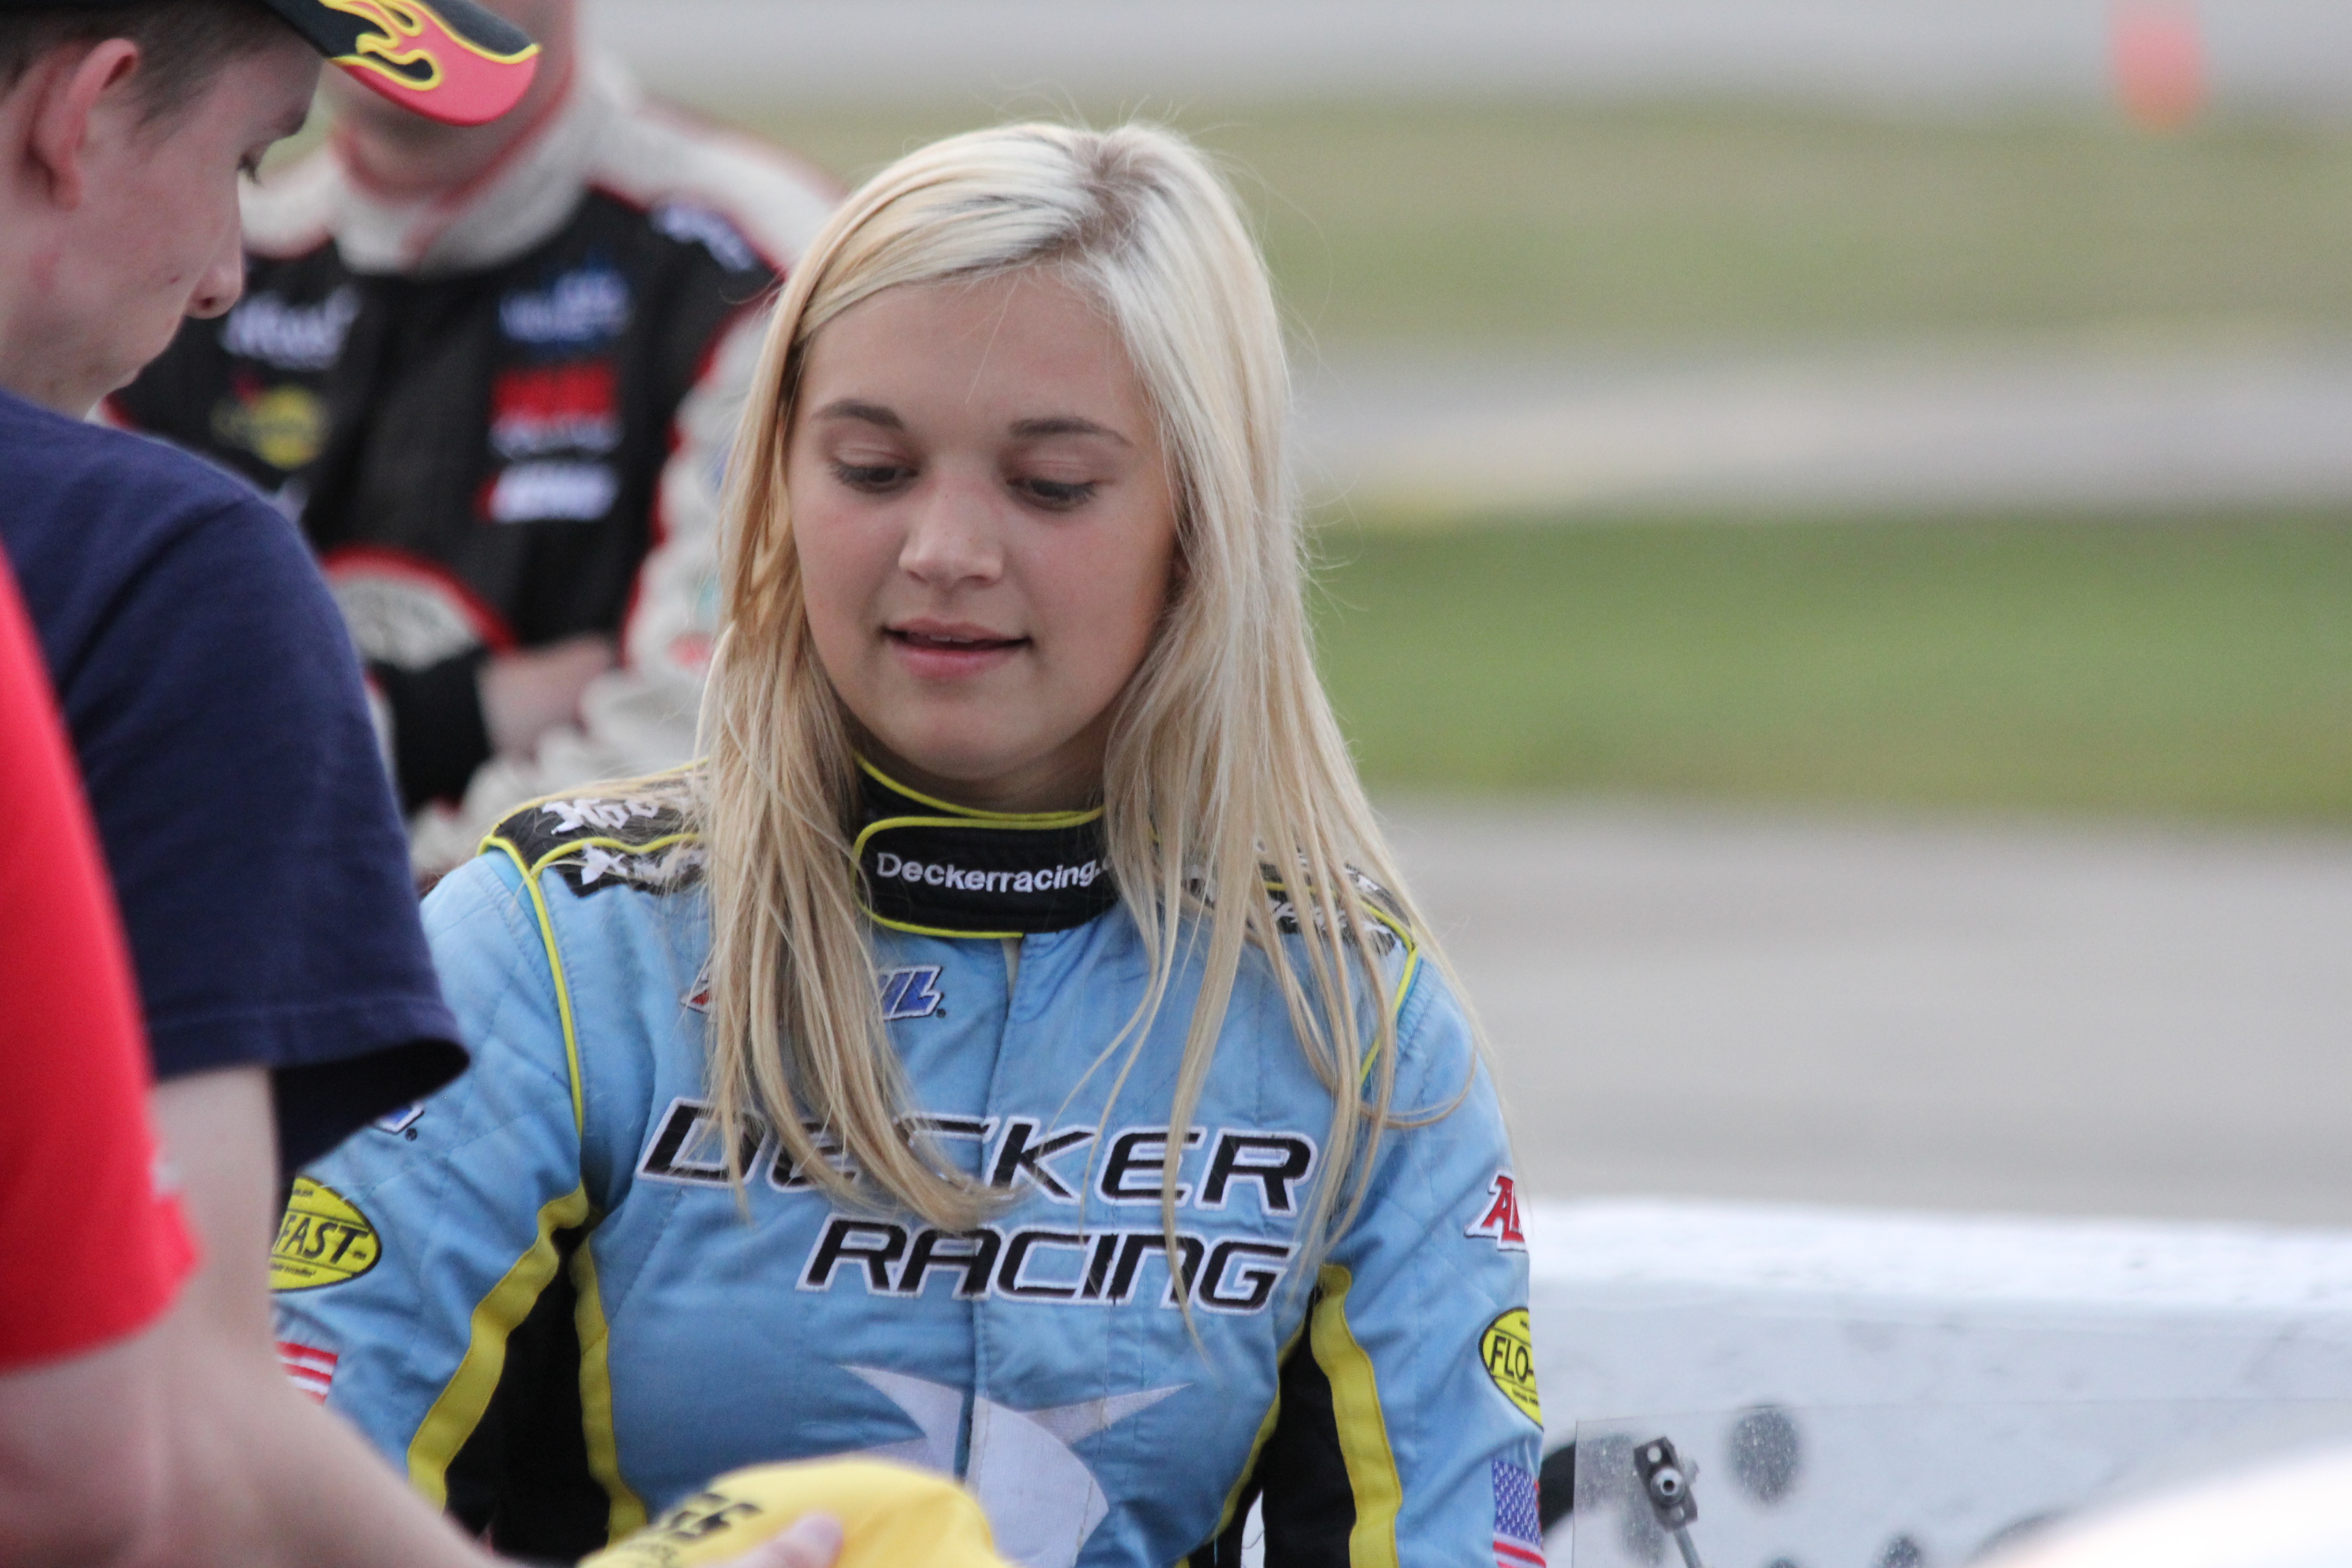 File:Natalie Decker signing autographs WIR 2014.jpg - Wikimedia Commons